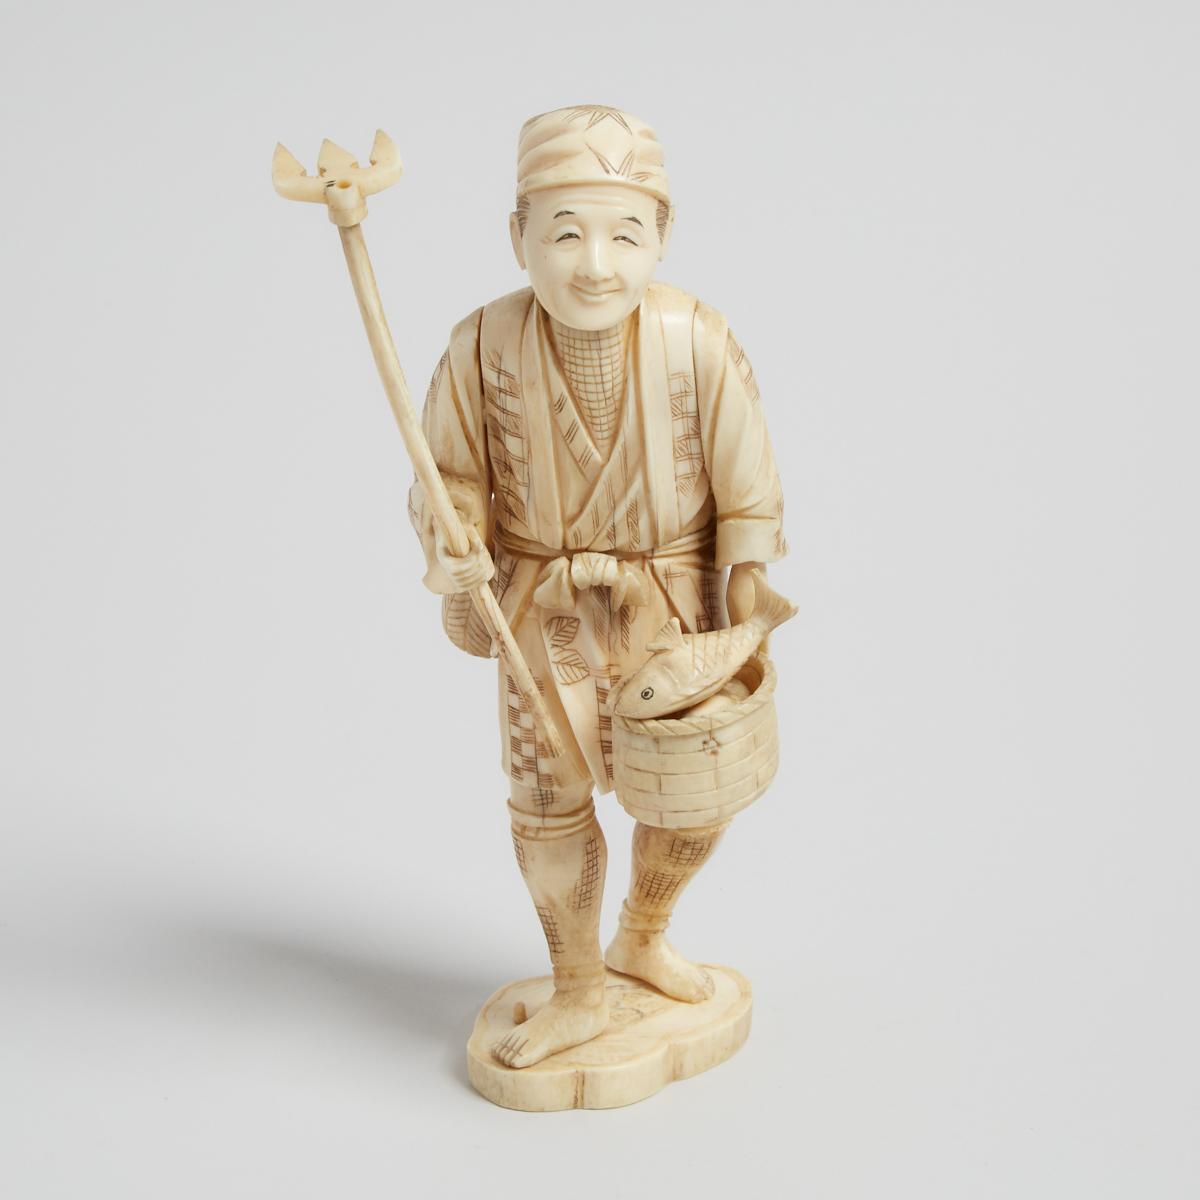 A Bone Carved Okimono of a Farmer, Early 20th Century, 二十世紀早期 骨雕漁夫立像, height 9 in — 22.9 cm - Image 3 of 3